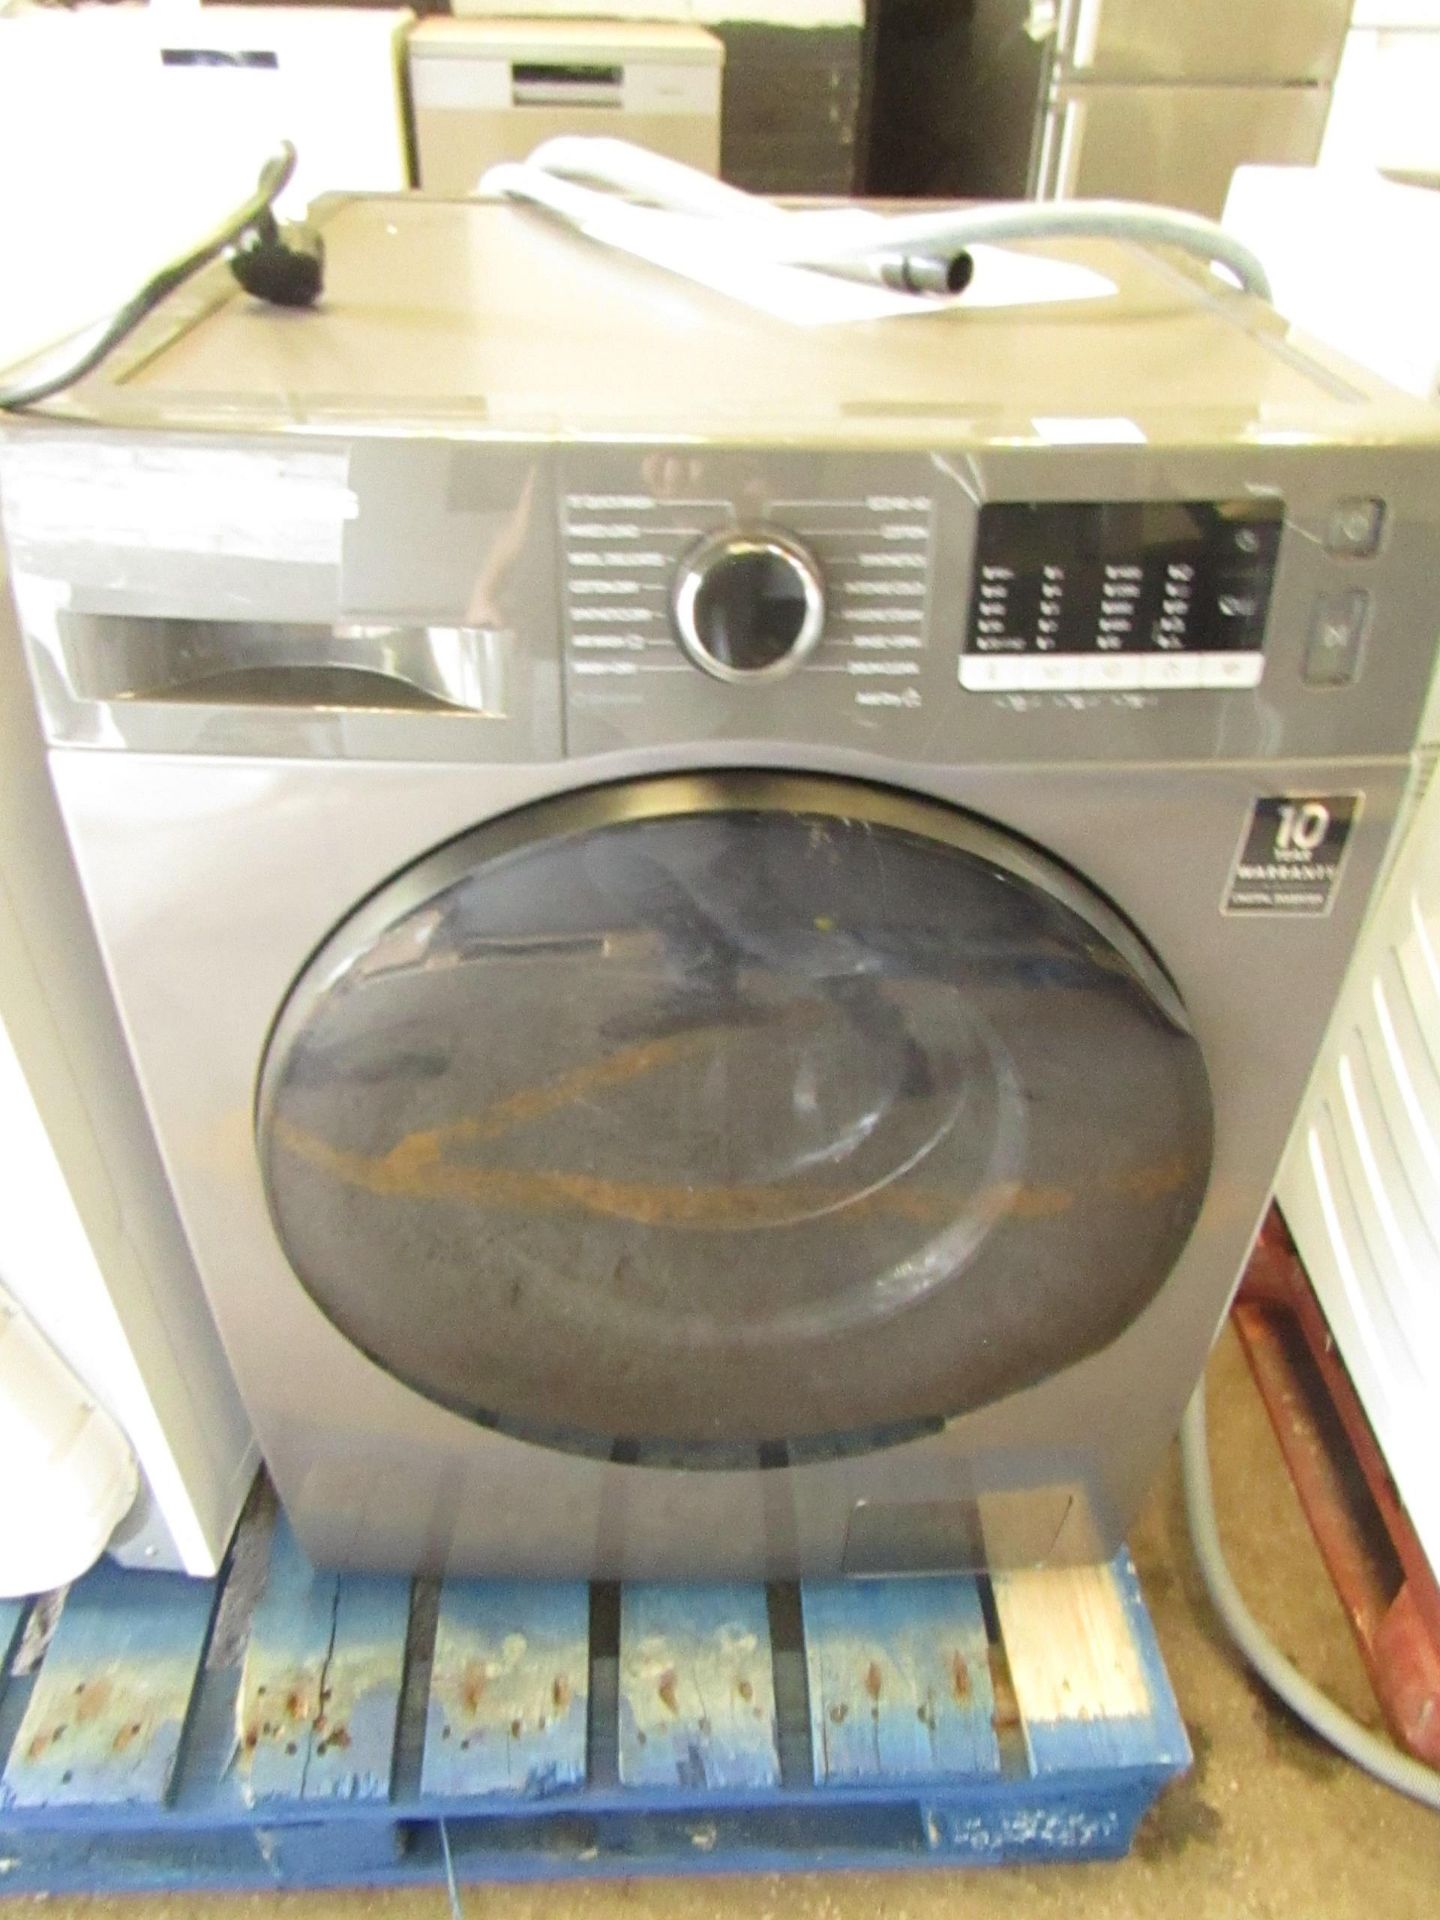 Samsung Washer dryer, it doesn’t have a plug attached so we are unable to check it plus the